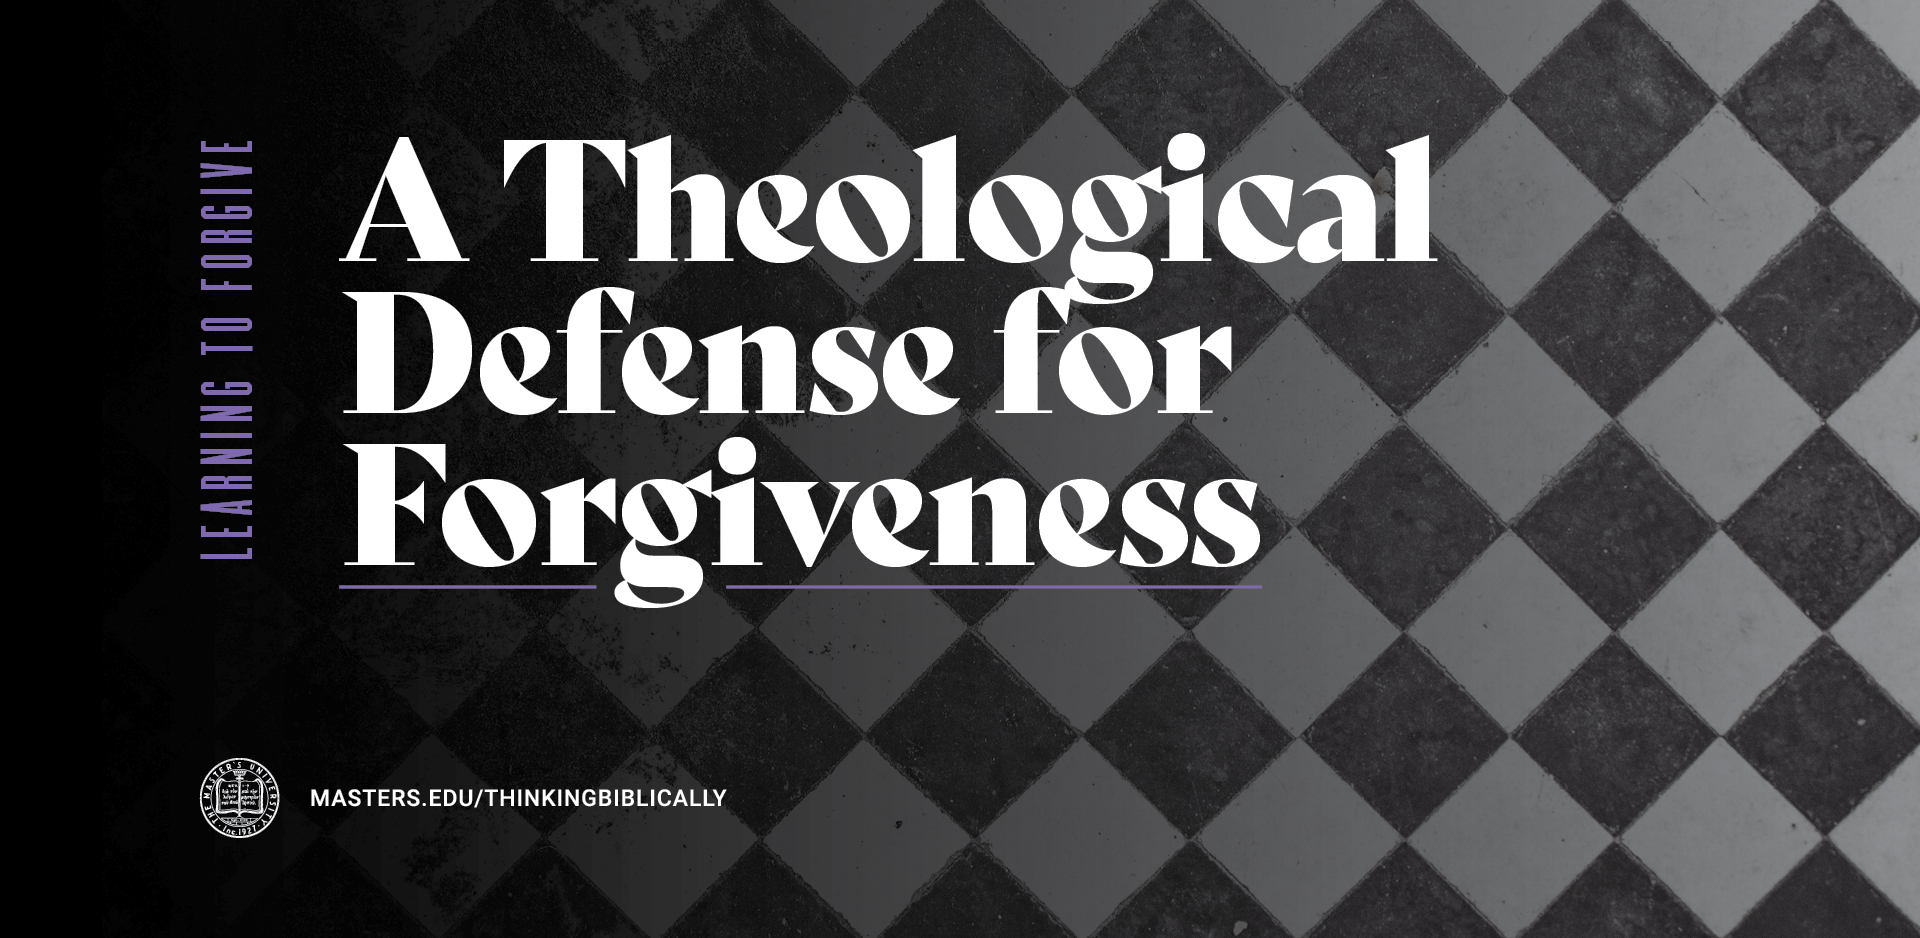 A Theological Defense for Forgiveness